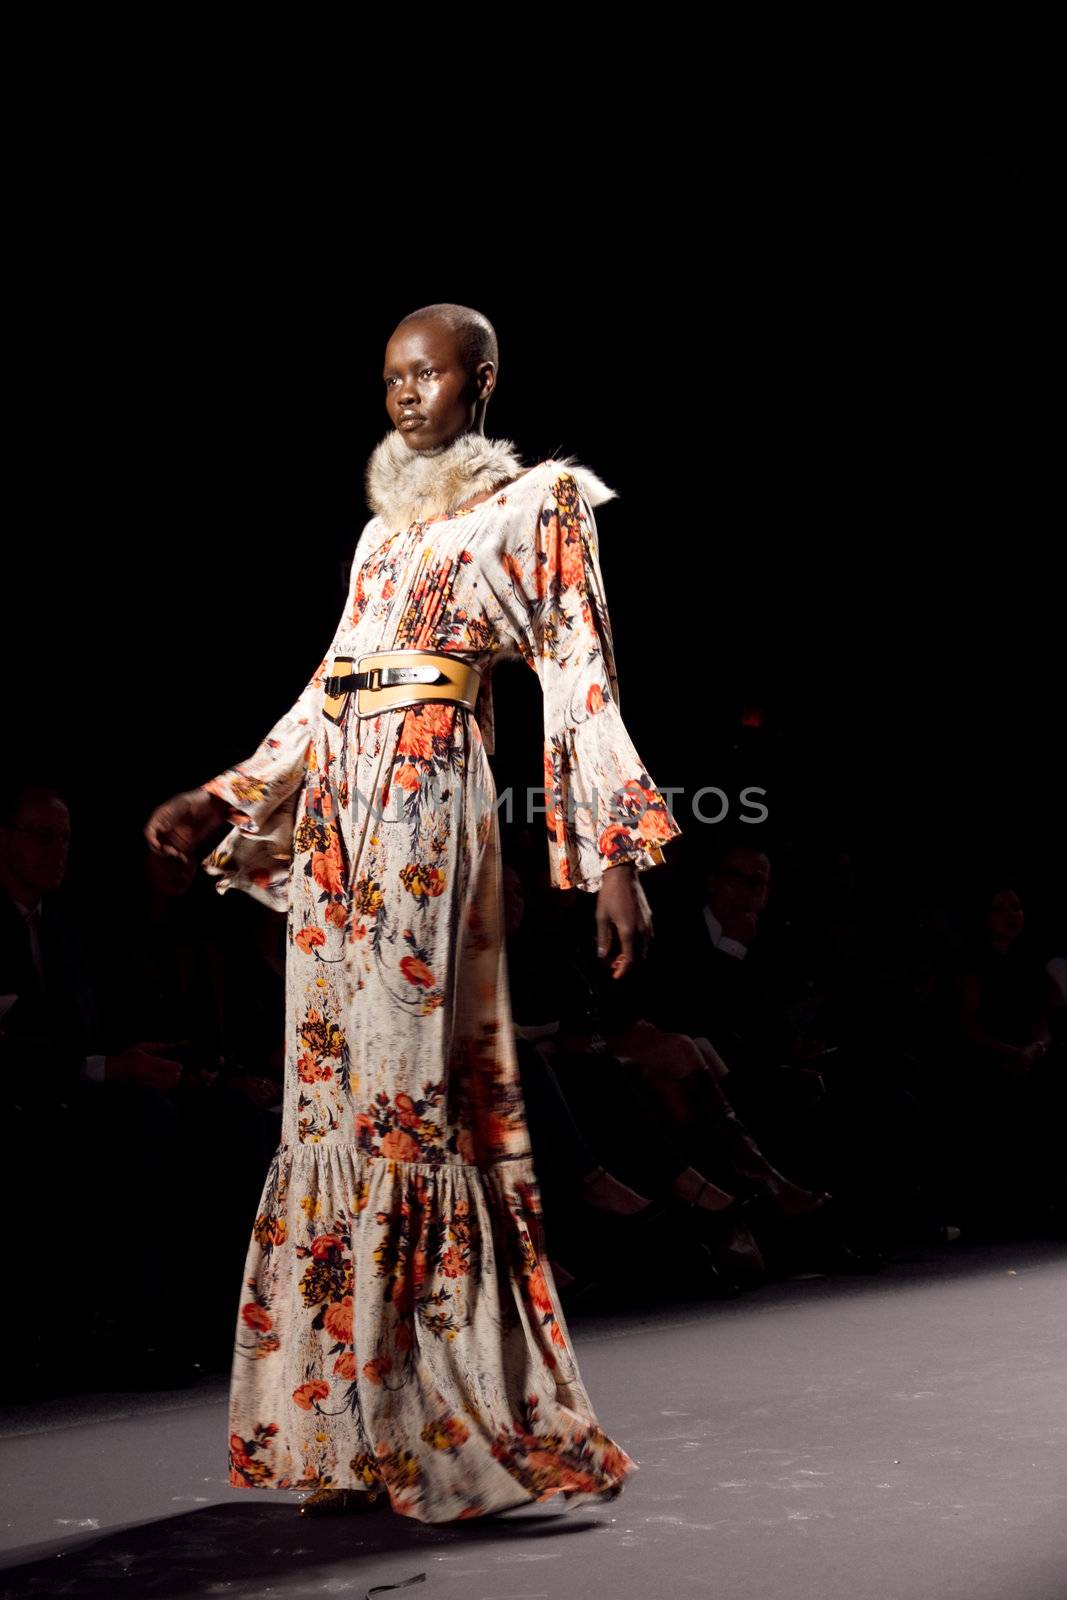 NEW YORK, NY - FEBRUARY 14: A model walks the runway at the Tracy Reese Fall 2011 fashion show during Mercedes-Benz Fashion Week at The Studio at Lincoln Center on February 14, 2011 in New York City. (Photo by Diana Beato)